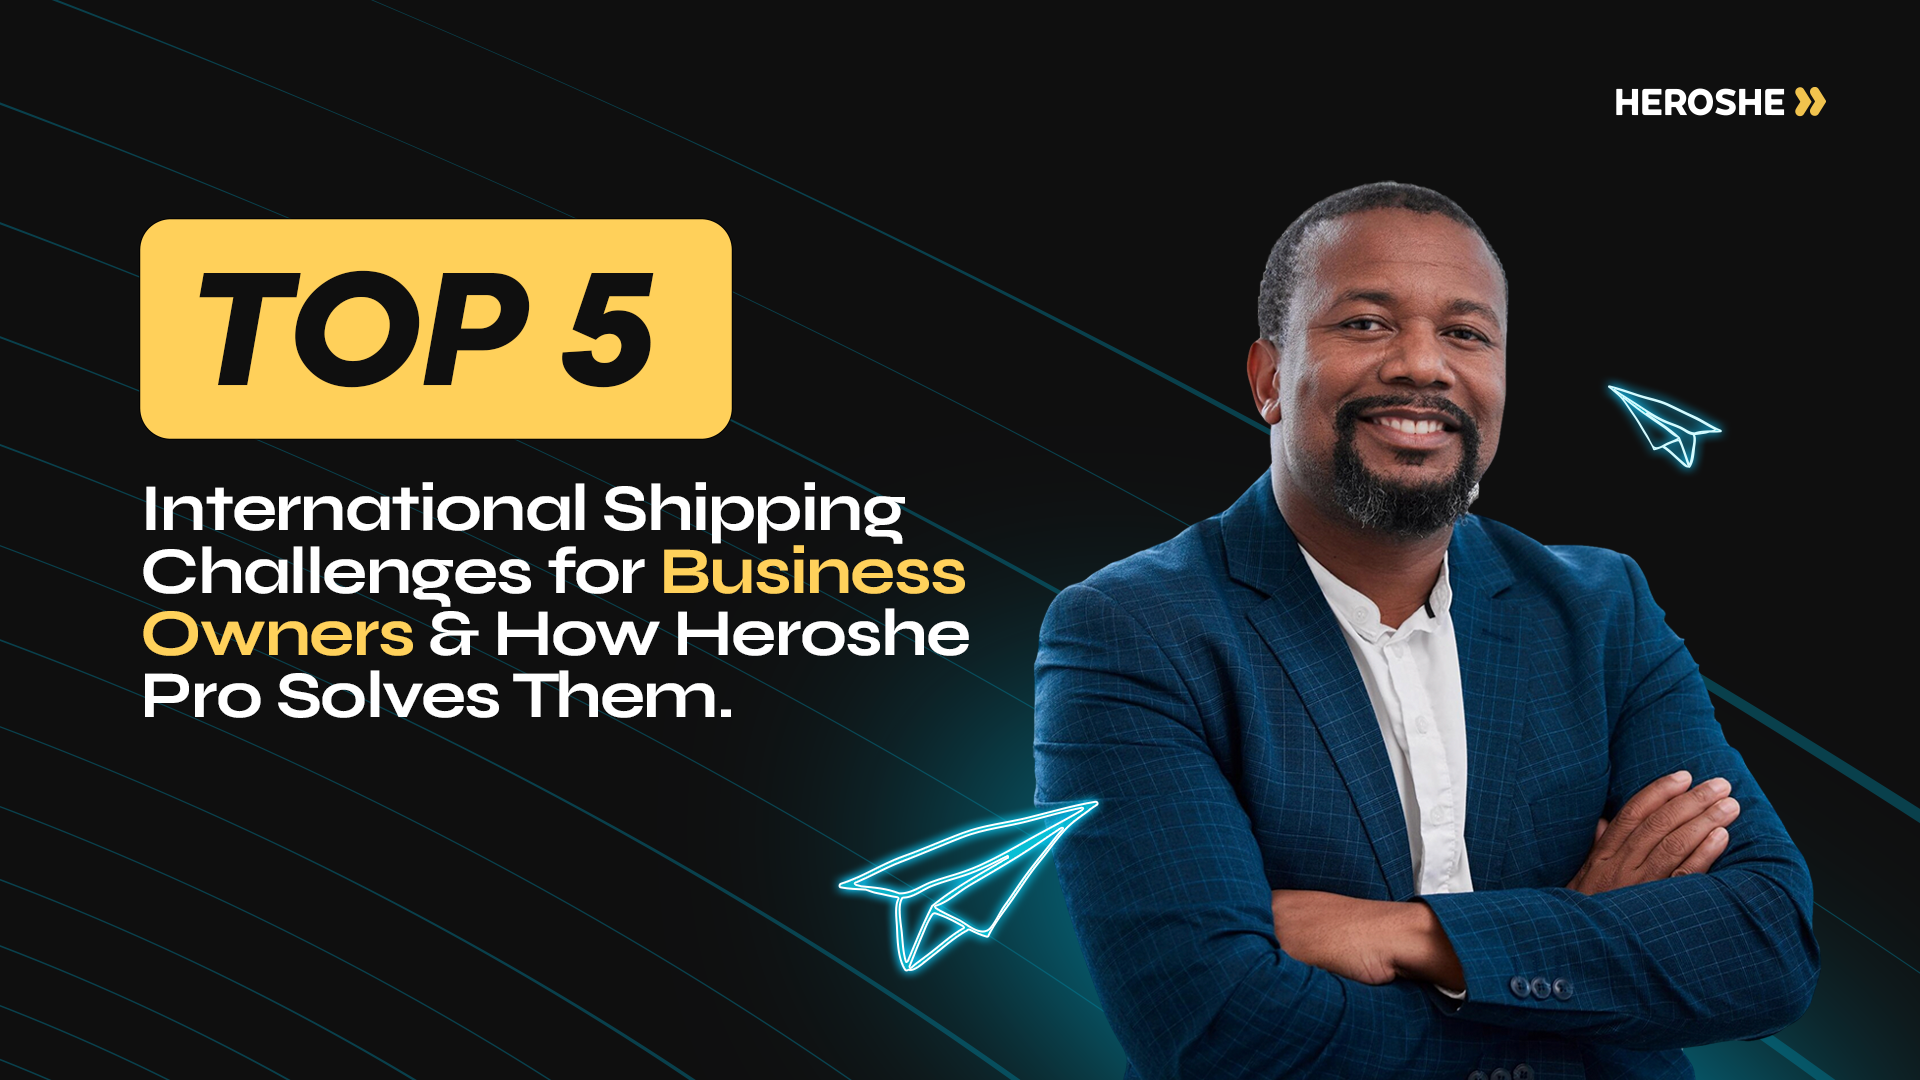 Top 5 International Shipping Challenges for Business Owners and How Heroshe Solves Them